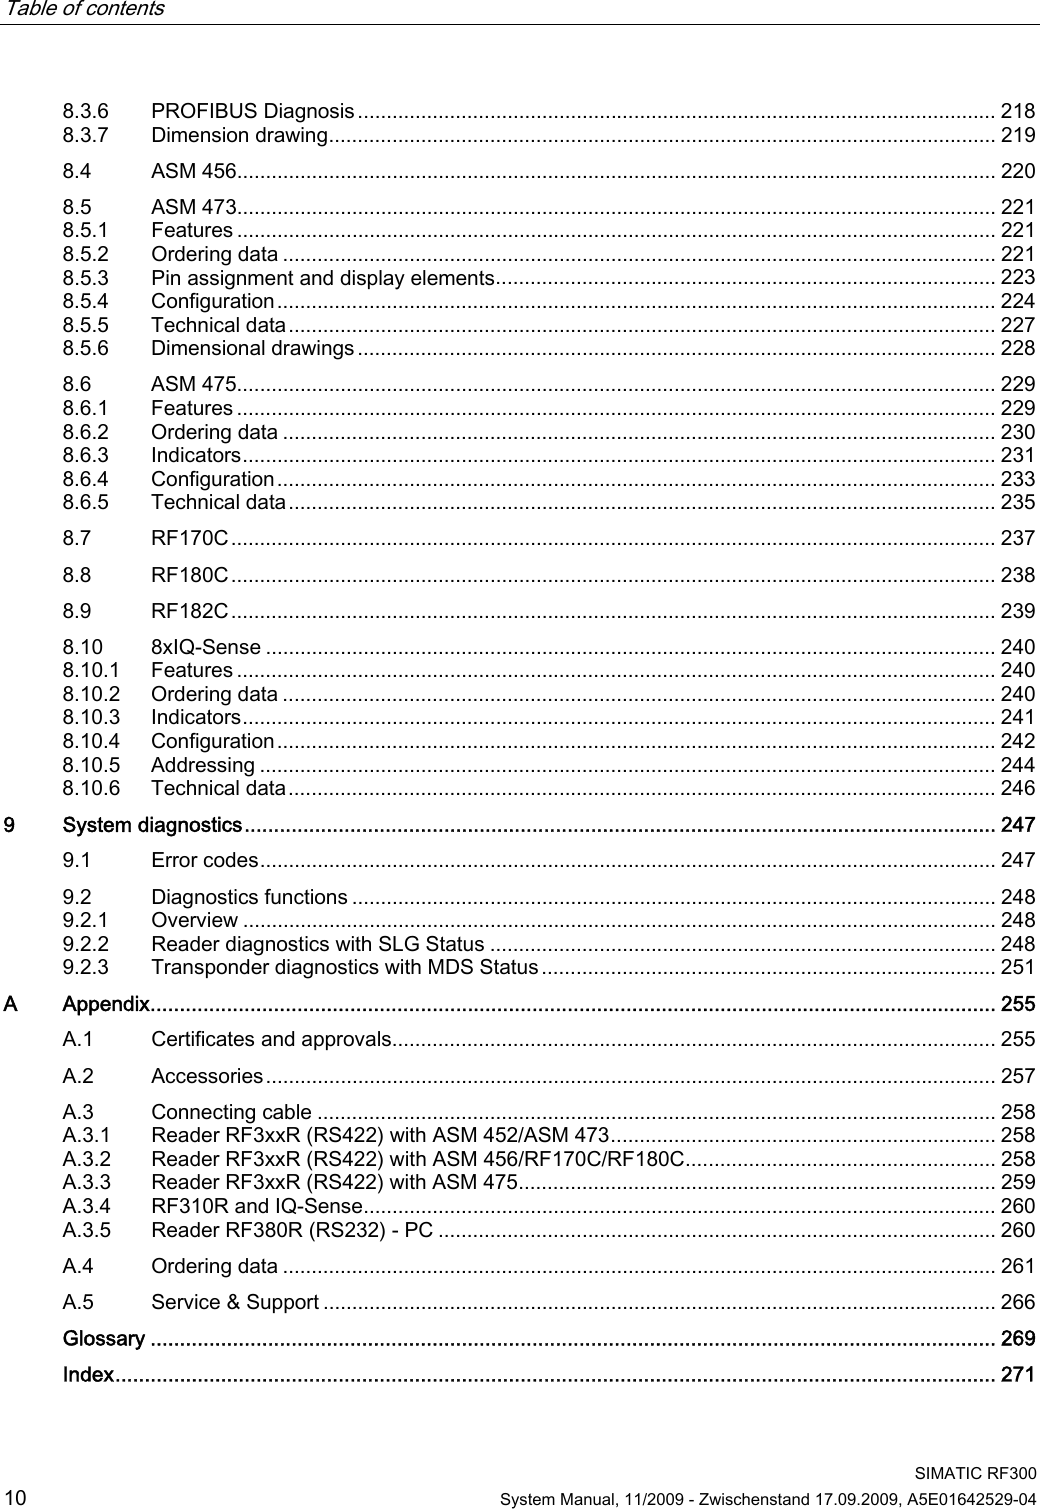 Table of contents      SIMATIC RF300 10  System Manual, 11/2009 - Zwischenstand 17.09.2009, A5E01642529-04 8.3.6  PROFIBUS Diagnosis............................................................................................................... 218 8.3.7  Dimension drawing.................................................................................................................... 219 8.4  ASM 456.................................................................................................................................... 220 8.5  ASM 473.................................................................................................................................... 221 8.5.1  Features .................................................................................................................................... 221 8.5.2  Ordering data ............................................................................................................................ 221 8.5.3  Pin assignment and display elements....................................................................................... 223 8.5.4  Configuration............................................................................................................................. 224 8.5.5  Technical data........................................................................................................................... 227 8.5.6  Dimensional drawings............................................................................................................... 228 8.6  ASM 475.................................................................................................................................... 229 8.6.1  Features .................................................................................................................................... 229 8.6.2  Ordering data ............................................................................................................................ 230 8.6.3  Indicators................................................................................................................................... 231 8.6.4  Configuration............................................................................................................................. 233 8.6.5  Technical data........................................................................................................................... 235 8.7  RF170C..................................................................................................................................... 237 8.8  RF180C..................................................................................................................................... 238 8.9  RF182C..................................................................................................................................... 239 8.10  8xIQ-Sense ............................................................................................................................... 240 8.10.1  Features .................................................................................................................................... 240 8.10.2  Ordering data ............................................................................................................................ 240 8.10.3  Indicators................................................................................................................................... 241 8.10.4  Configuration............................................................................................................................. 242 8.10.5  Addressing ................................................................................................................................ 244 8.10.6  Technical data........................................................................................................................... 246 9  System diagnostics................................................................................................................................ 247 9.1  Error codes................................................................................................................................ 247 9.2  Diagnostics functions ................................................................................................................ 248 9.2.1  Overview ................................................................................................................................... 248 9.2.2  Reader diagnostics with SLG Status ........................................................................................ 248 9.2.3  Transponder diagnostics with MDS Status............................................................................... 251 A  Appendix................................................................................................................................................ 255 A.1  Certificates and approvals......................................................................................................... 255 A.2  Accessories............................................................................................................................... 257 A.3  Connecting cable ...................................................................................................................... 258 A.3.1  Reader RF3xxR (RS422) with ASM 452/ASM 473................................................................... 258 A.3.2  Reader RF3xxR (RS422) with ASM 456/RF170C/RF180C...................................................... 258 A.3.3  Reader RF3xxR (RS422) with ASM 475................................................................................... 259 A.3.4  RF310R and IQ-Sense.............................................................................................................. 260 A.3.5  Reader RF380R (RS232) - PC ................................................................................................. 260 A.4  Ordering data ............................................................................................................................ 261 A.5  Service &amp; Support ..................................................................................................................... 266  Glossary ................................................................................................................................................ 269  Index...................................................................................................................................................... 271 